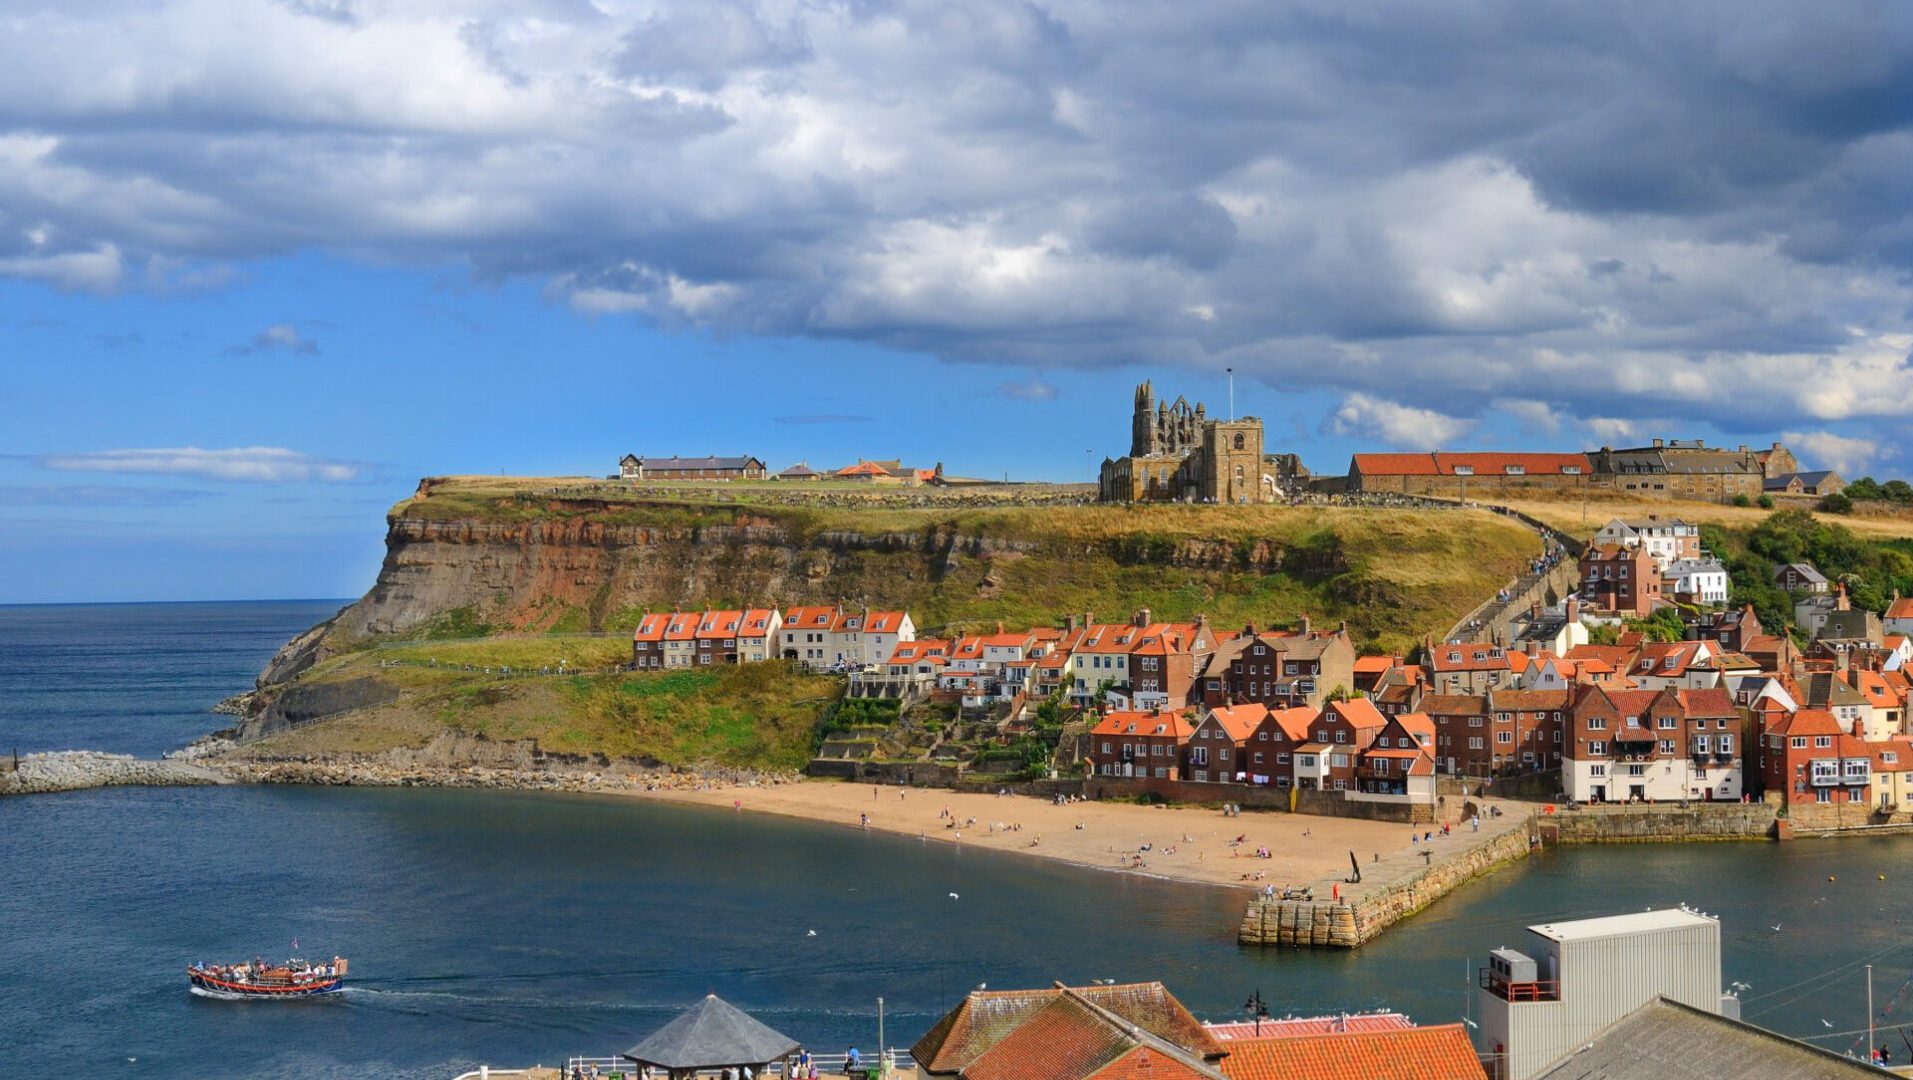 Cliffs In Whitby, England